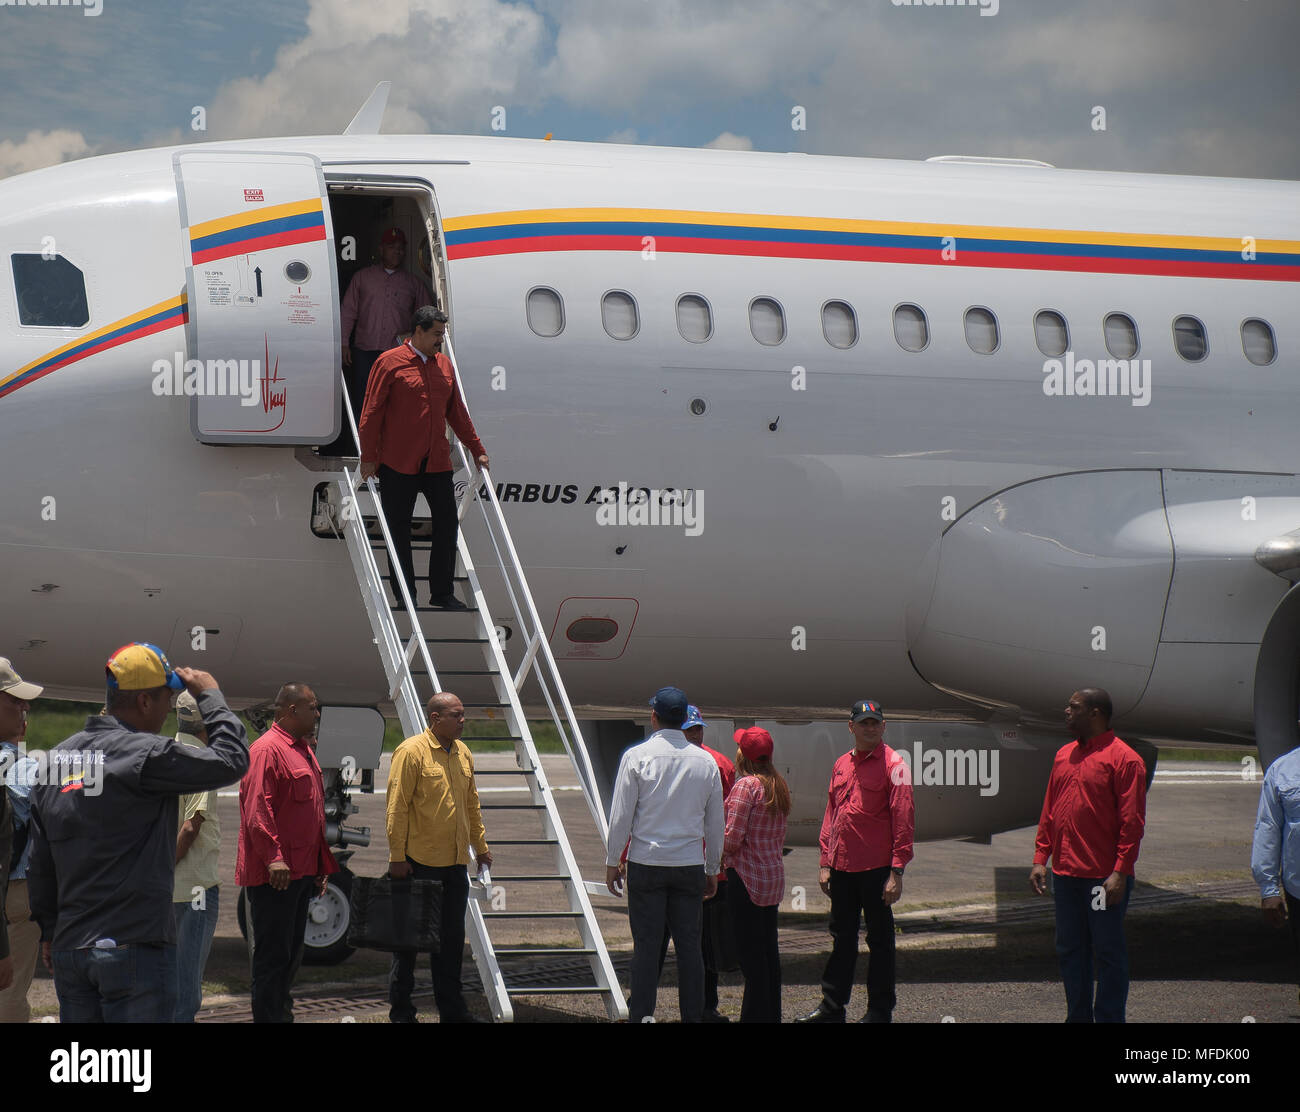 Venezuela, Tucupita. 24th april 2018. The president of Venezuela, Nicolás Maduro, arrives at the airport in the city of Tucupita, capital of the state of Delta Amacuro (east), to participate in a campaign event. Marcos Salgado / Alamy News Stock Photo